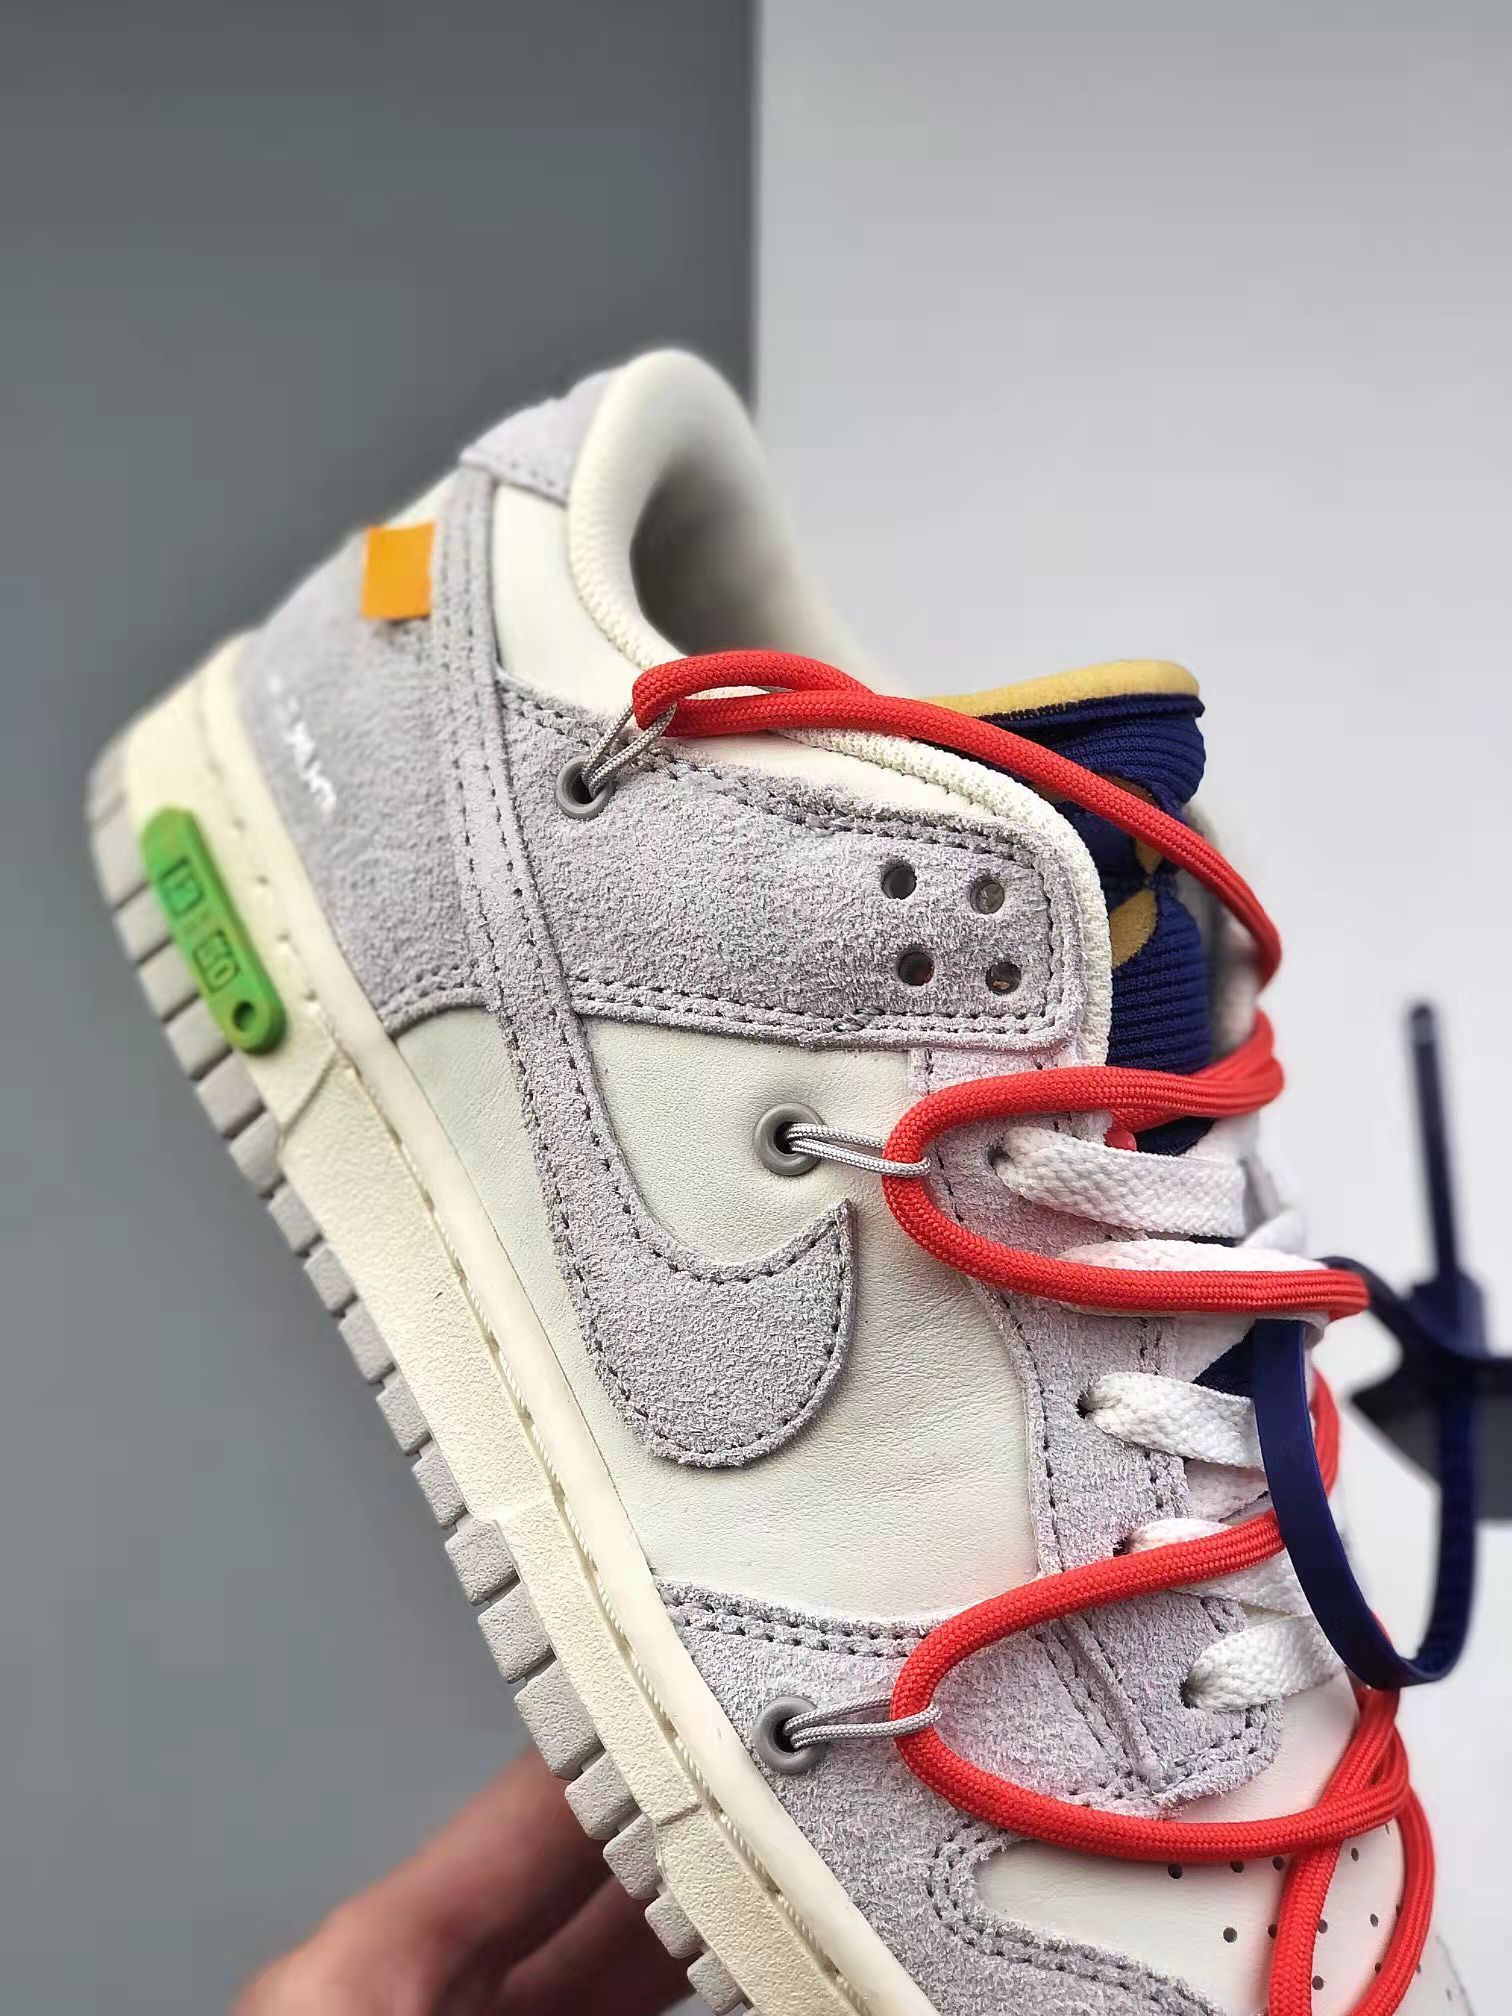 Nike Off-White x Dunk Low 'Lot 13 of 50' DJ0950-110: Exclusive Limited Edition Collaboration